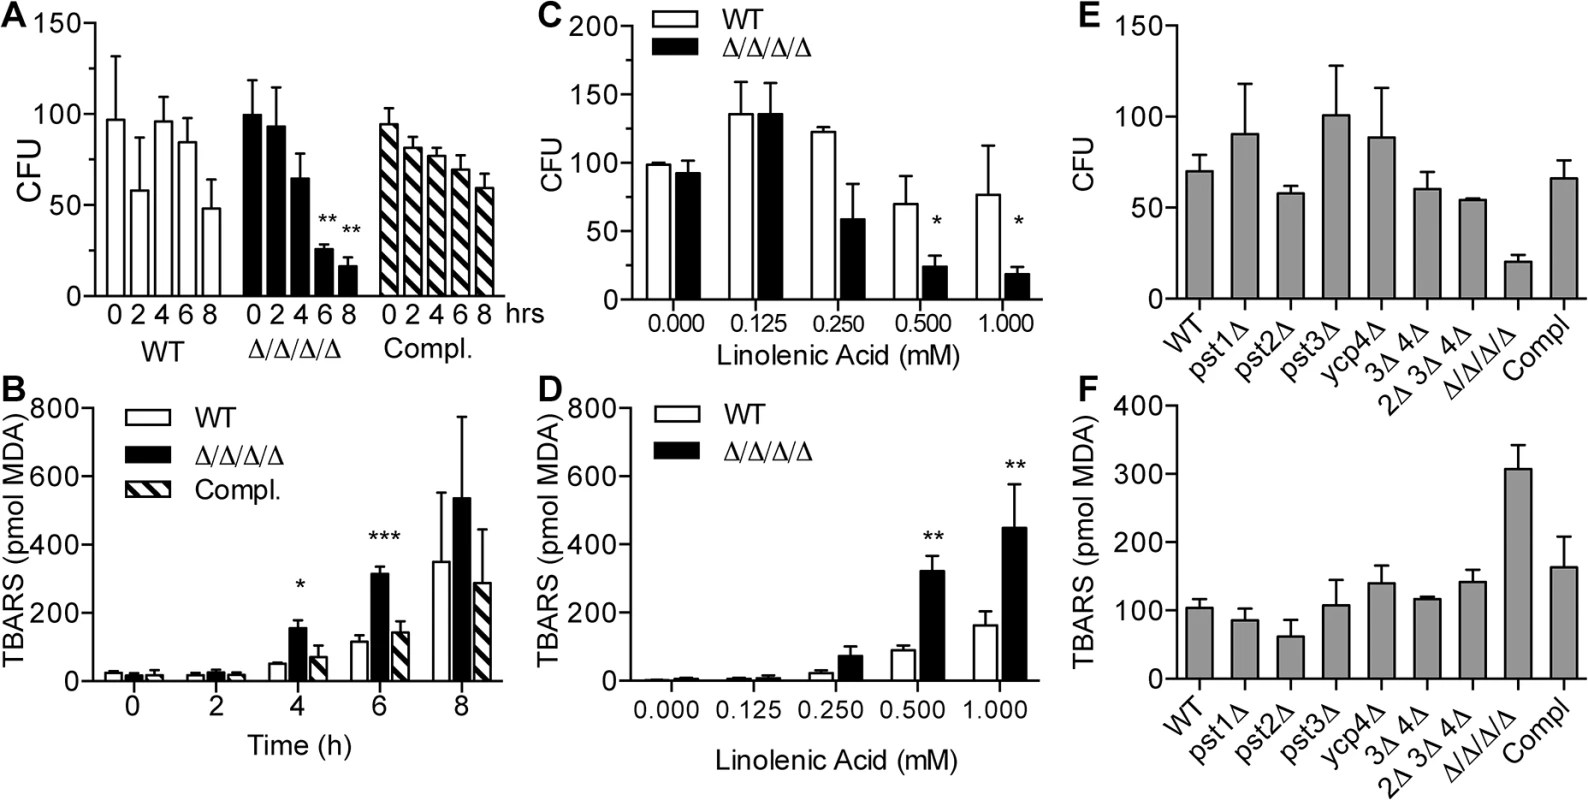 The Δ/Δ/Δ/Δ mutant strain is more sensitive to linolenic acid-induced cell death and lipid peroxidation.